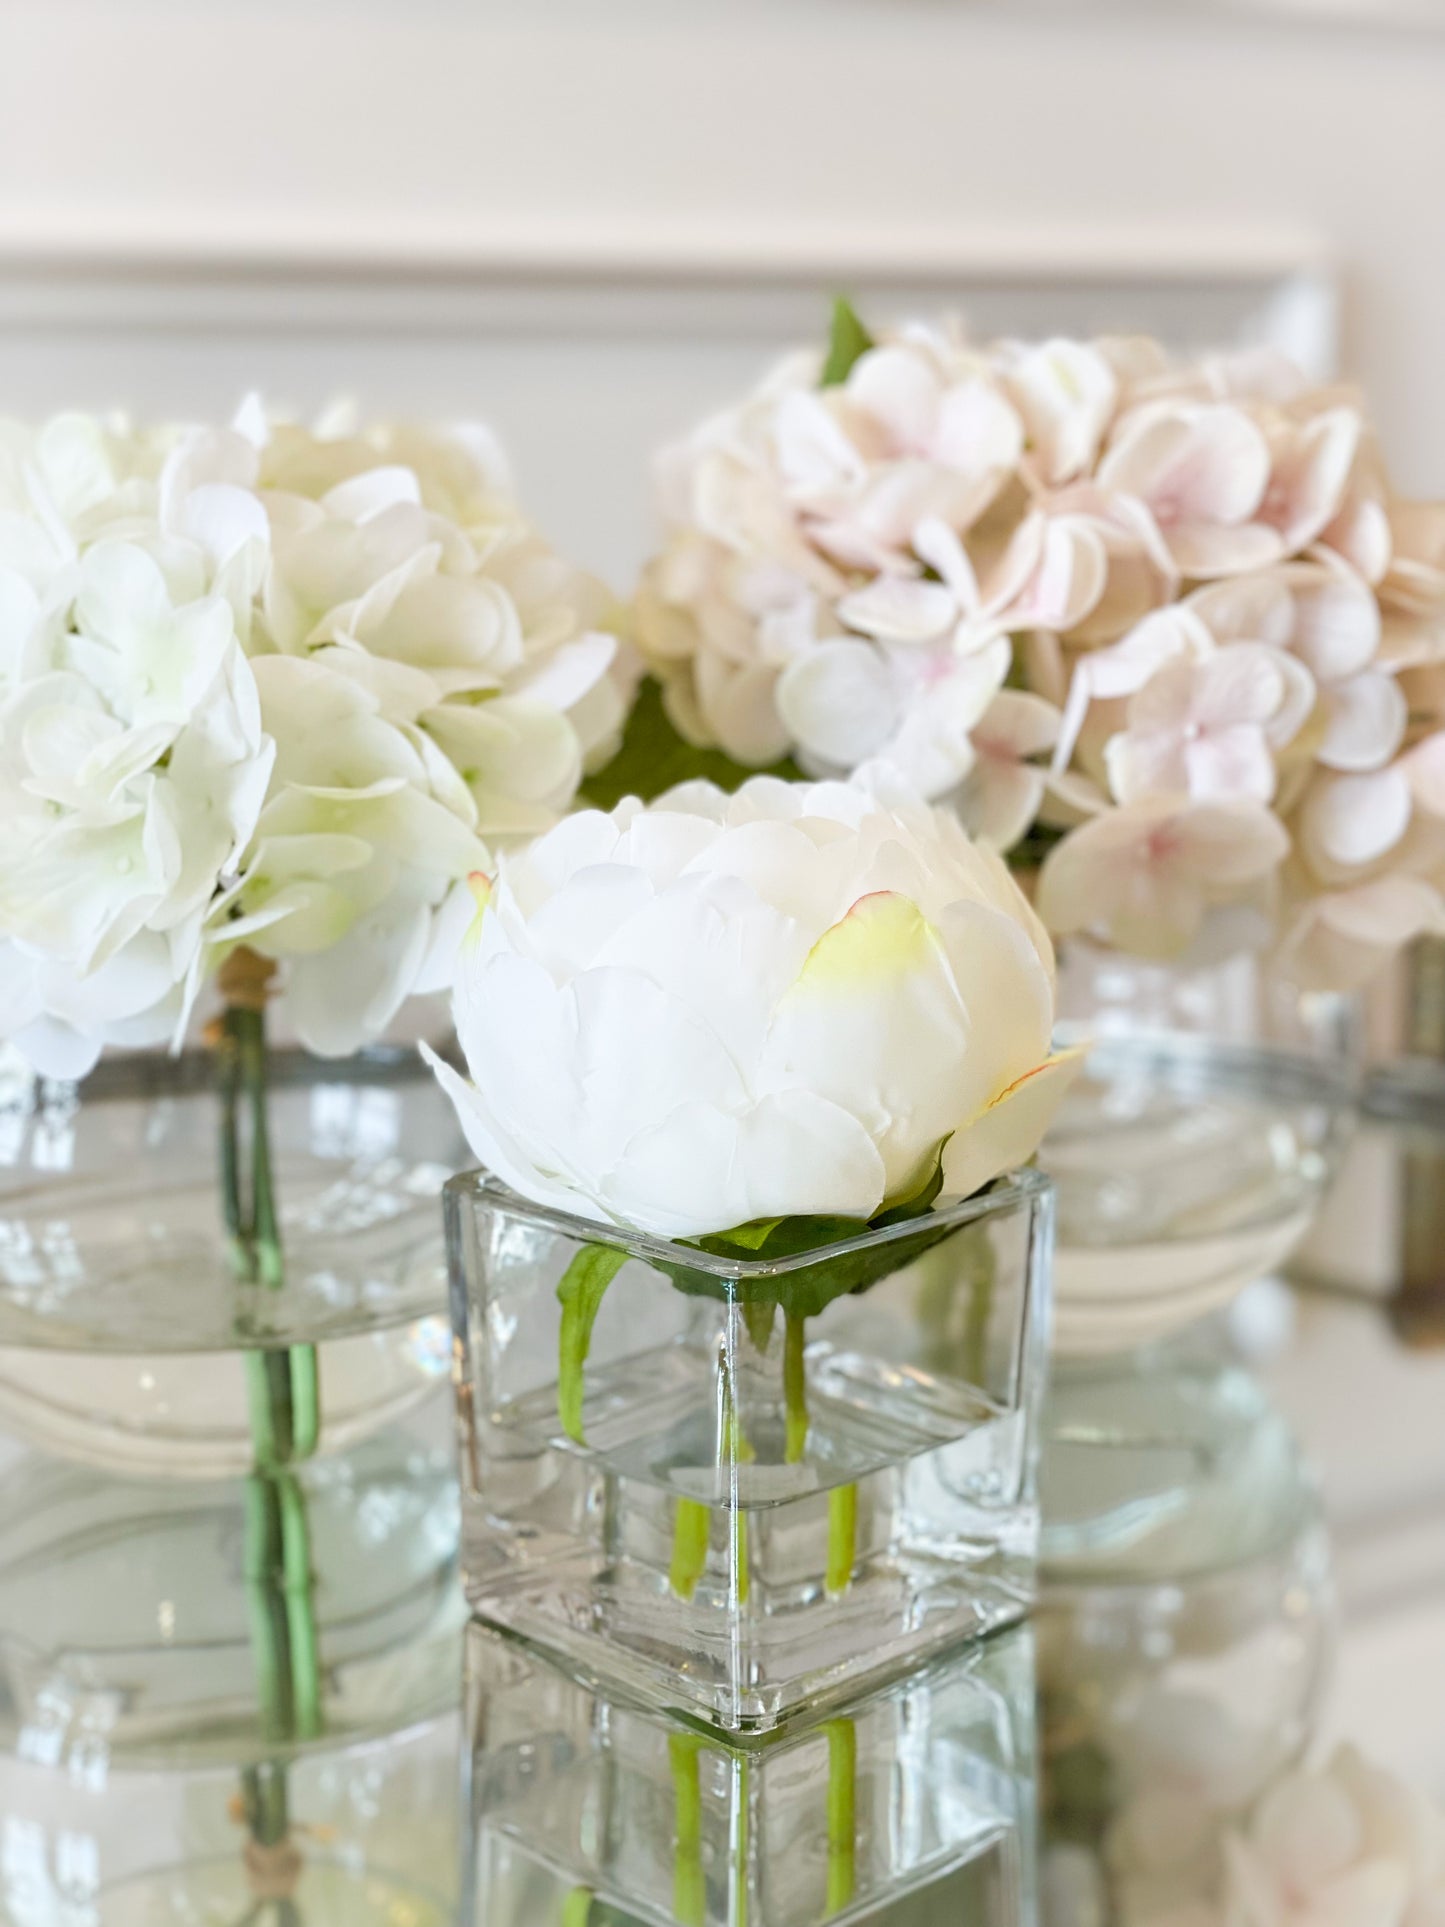 White With Lavender Hydrangeas In Glass Vase With Acrylic Water